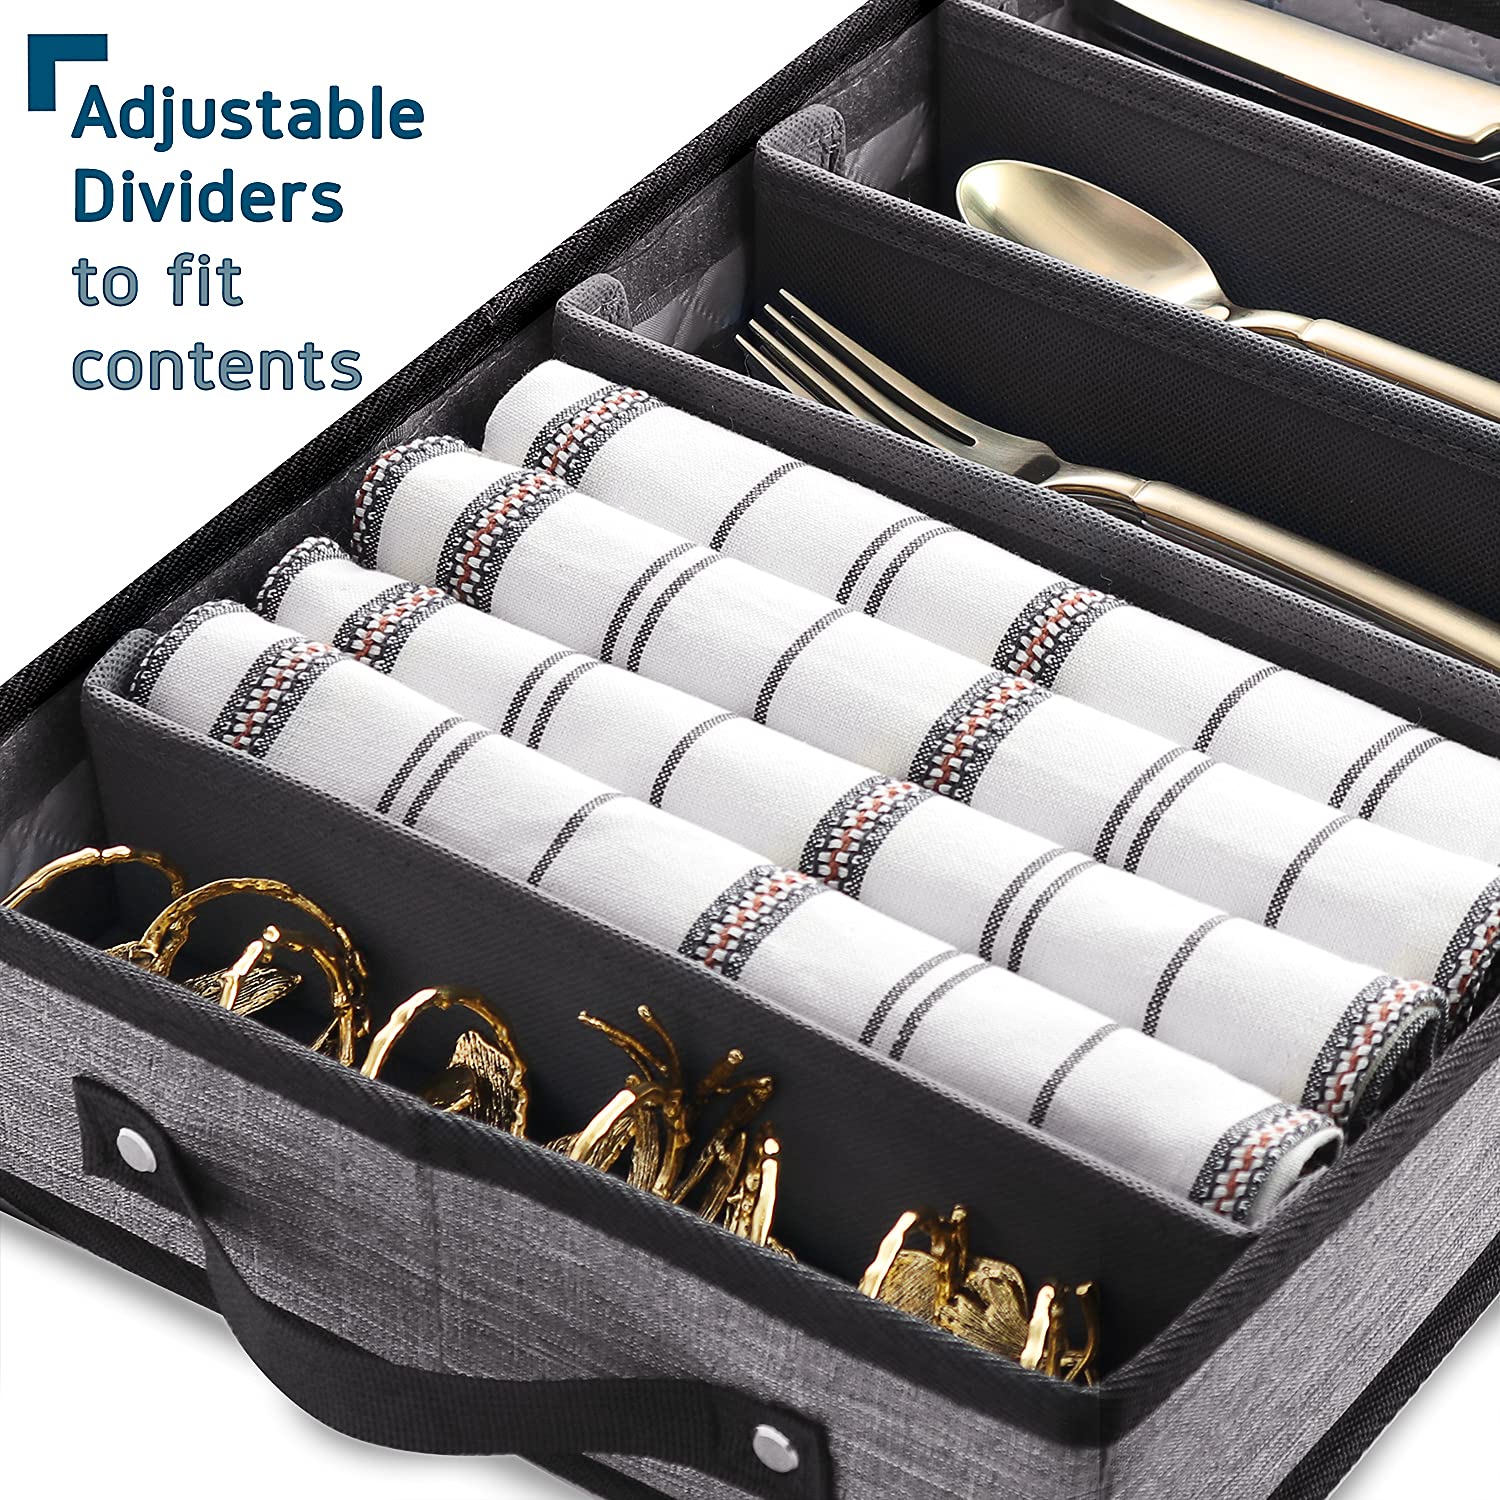 Flatware & Utensil Storage - Durable Silverware Storage Box with Padded Dividers, 5 Compartment Flatware Storage Case, Silverware Case with Handles and Removable Lid - Protects and Organizes Cutlery